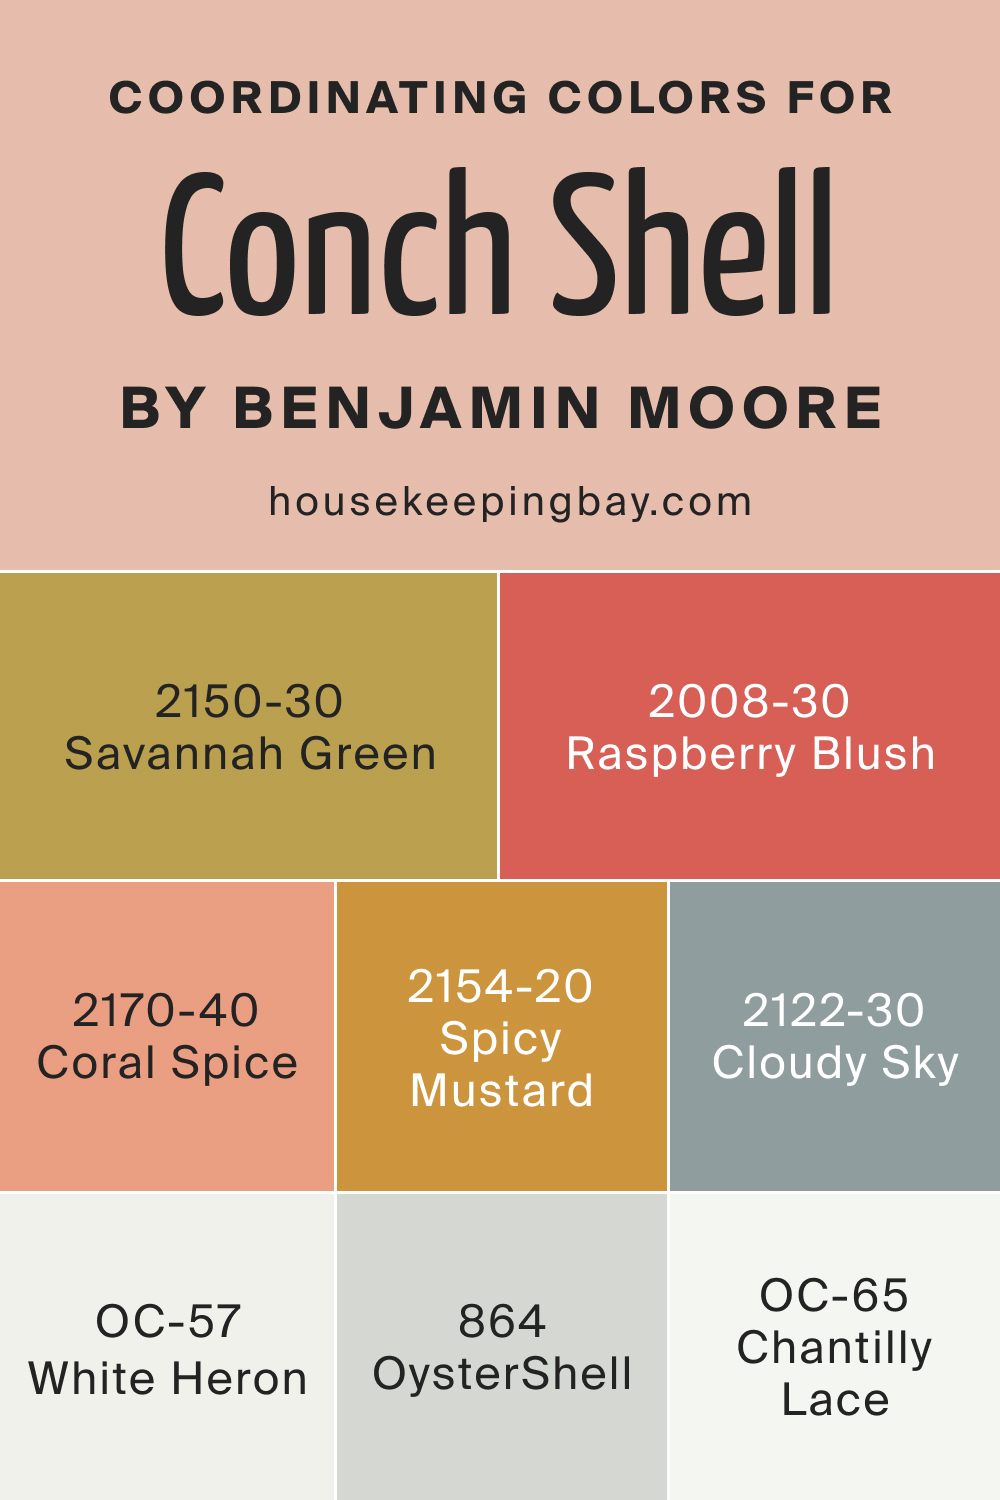 Coordinating Colors for Conch Shell 052 by Benjamin Moore